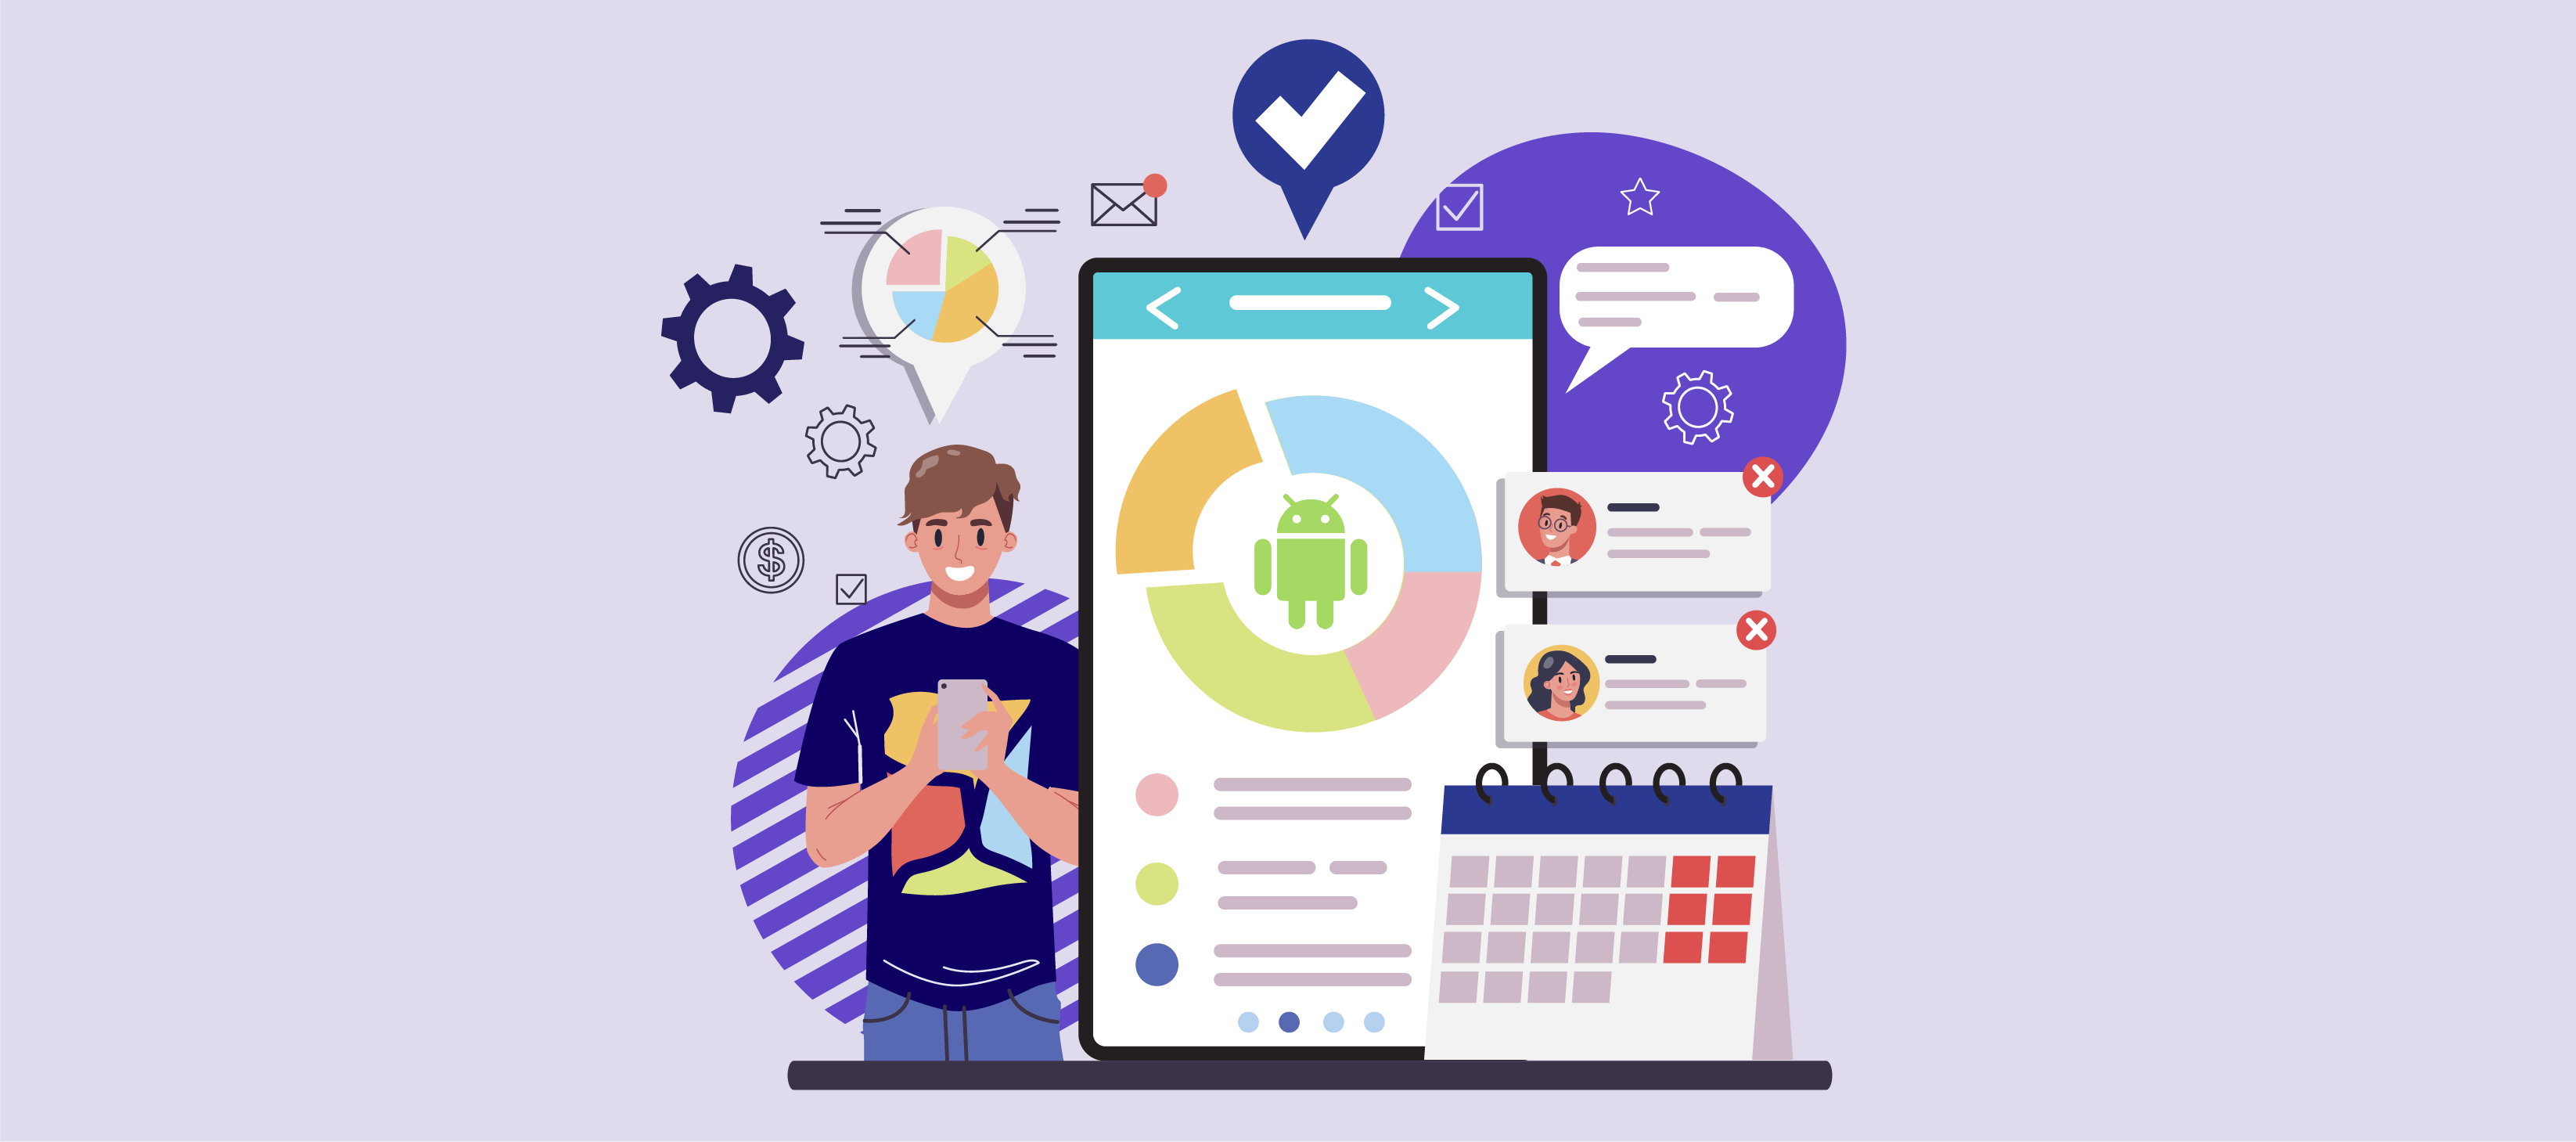 Performance Optimization Tools for Android App Development